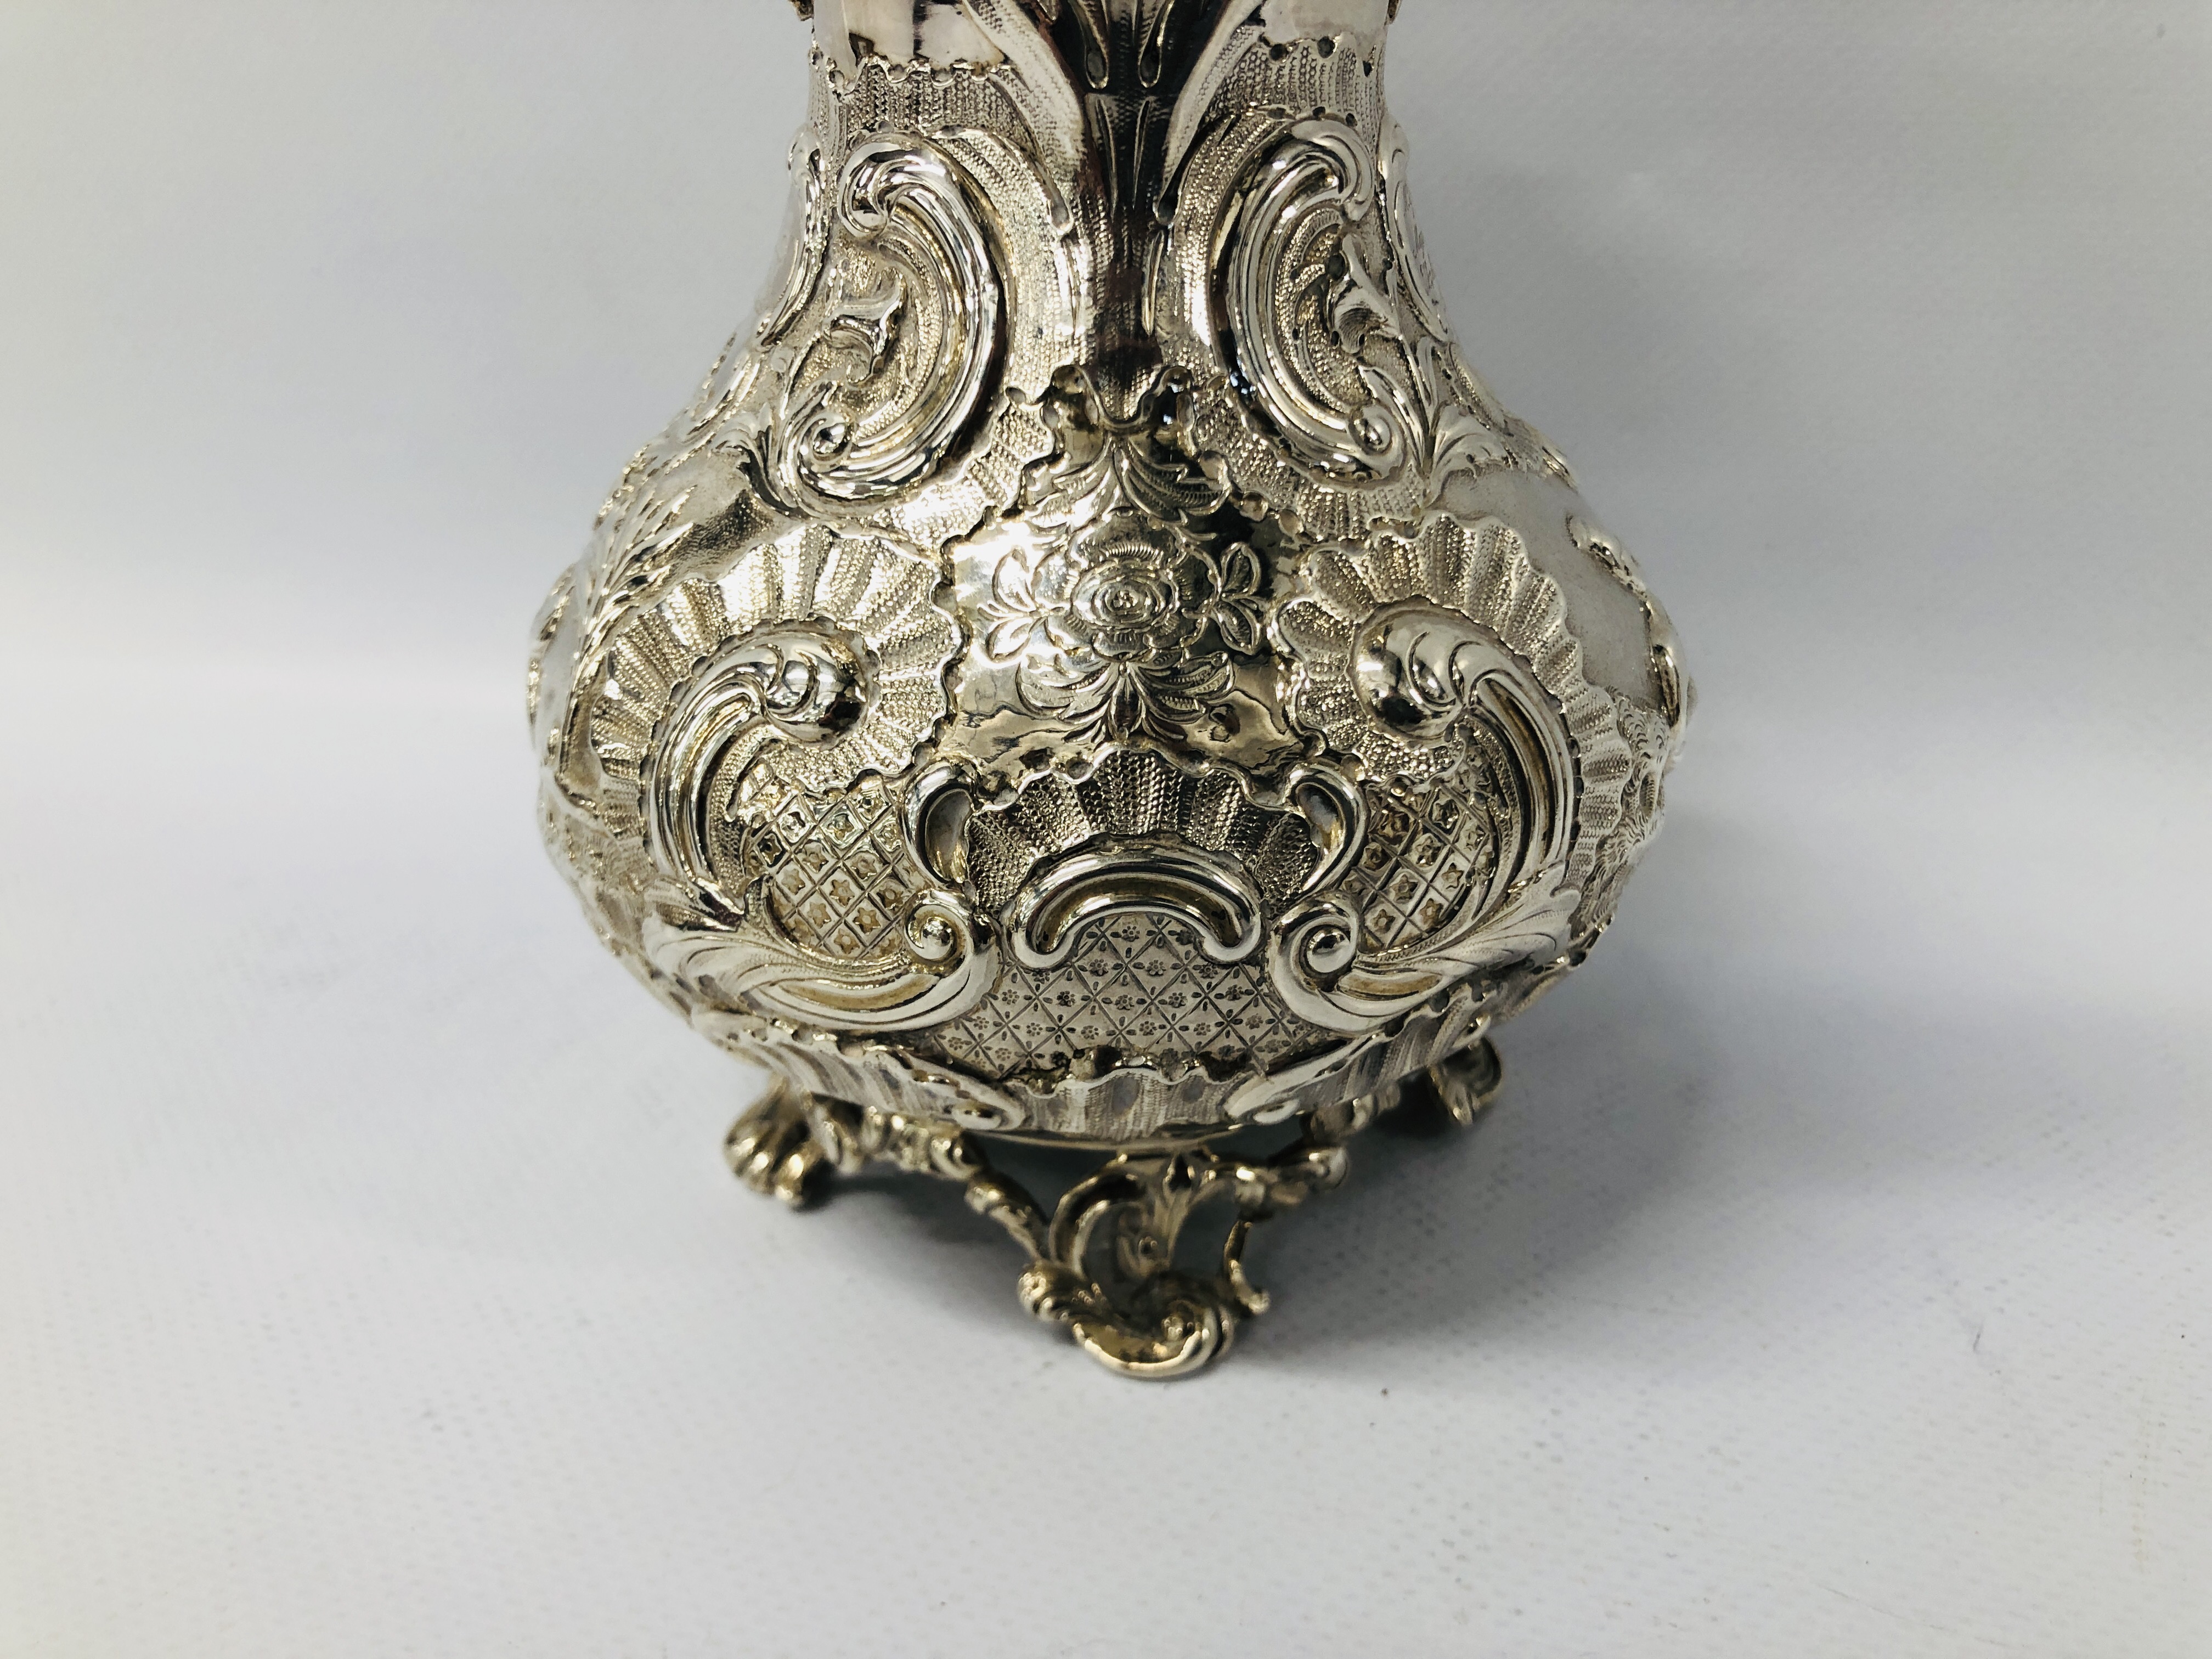 A SILVER MILK JUG OF ROCOCO DESIGN DECORATED WITH CHINOISERIE FIGURES WITH INSCRIPTION MR AND MRS J. - Image 21 of 25